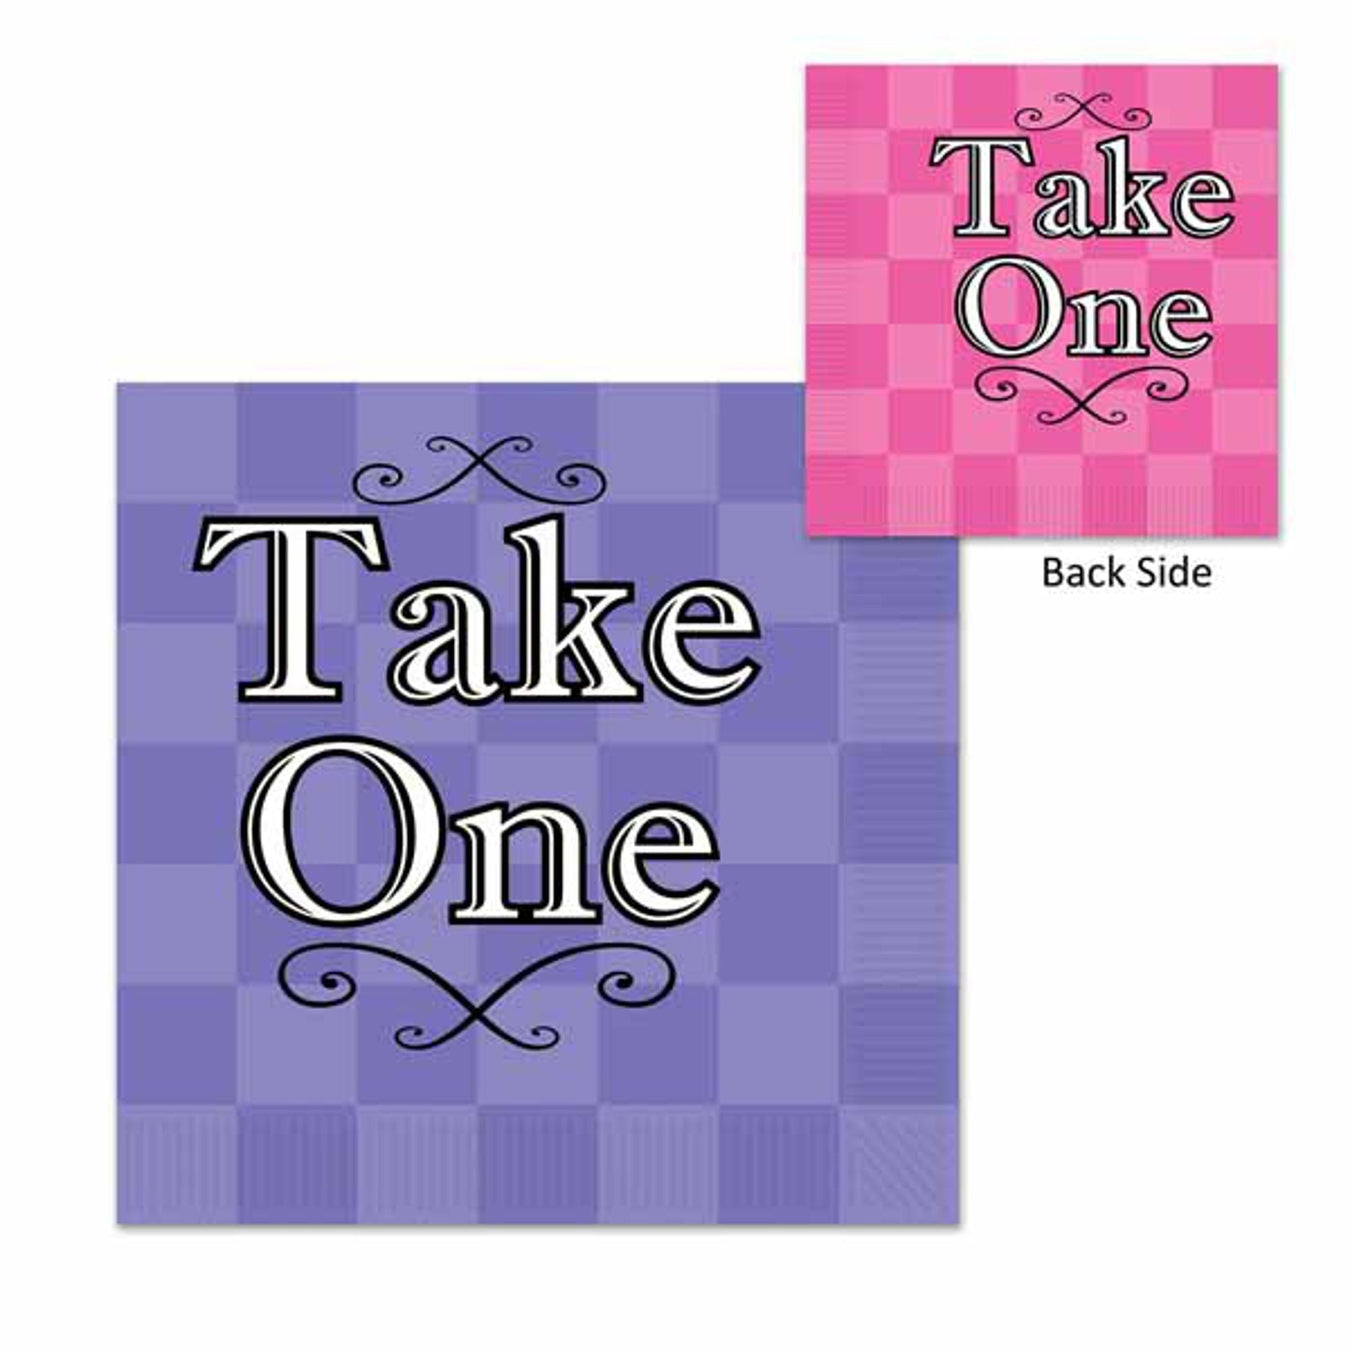 Party Napkins in Different Color and Designs